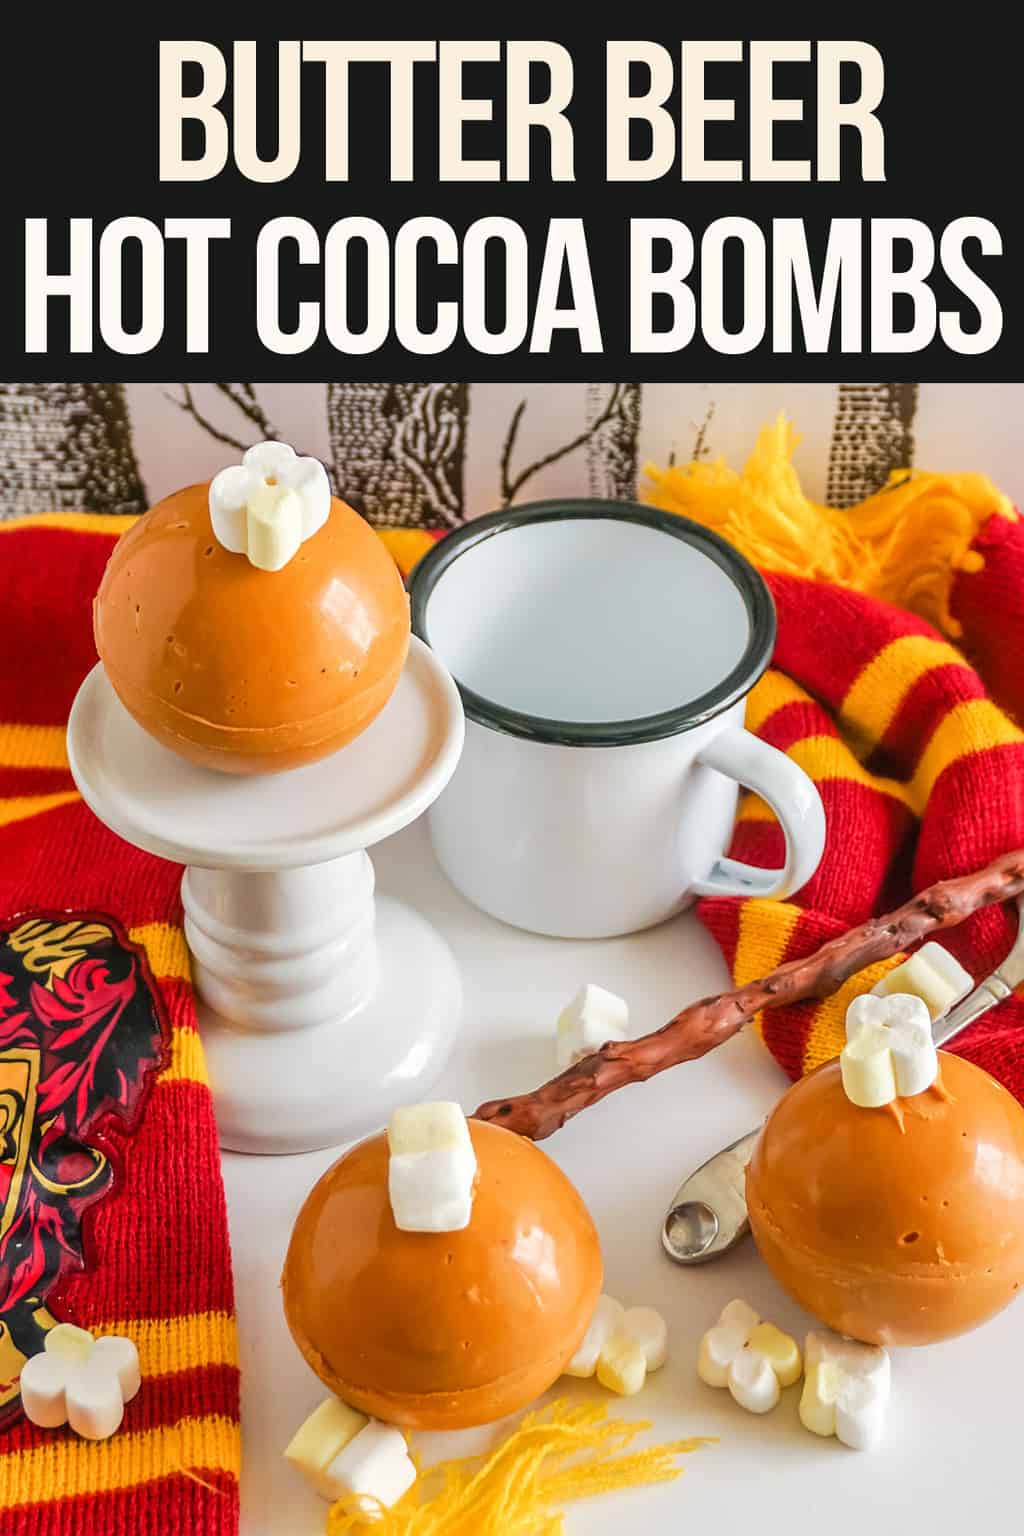 butterbeer hot chocolate bomb recipe with text which reads Butterbeer hot cocoa bombs